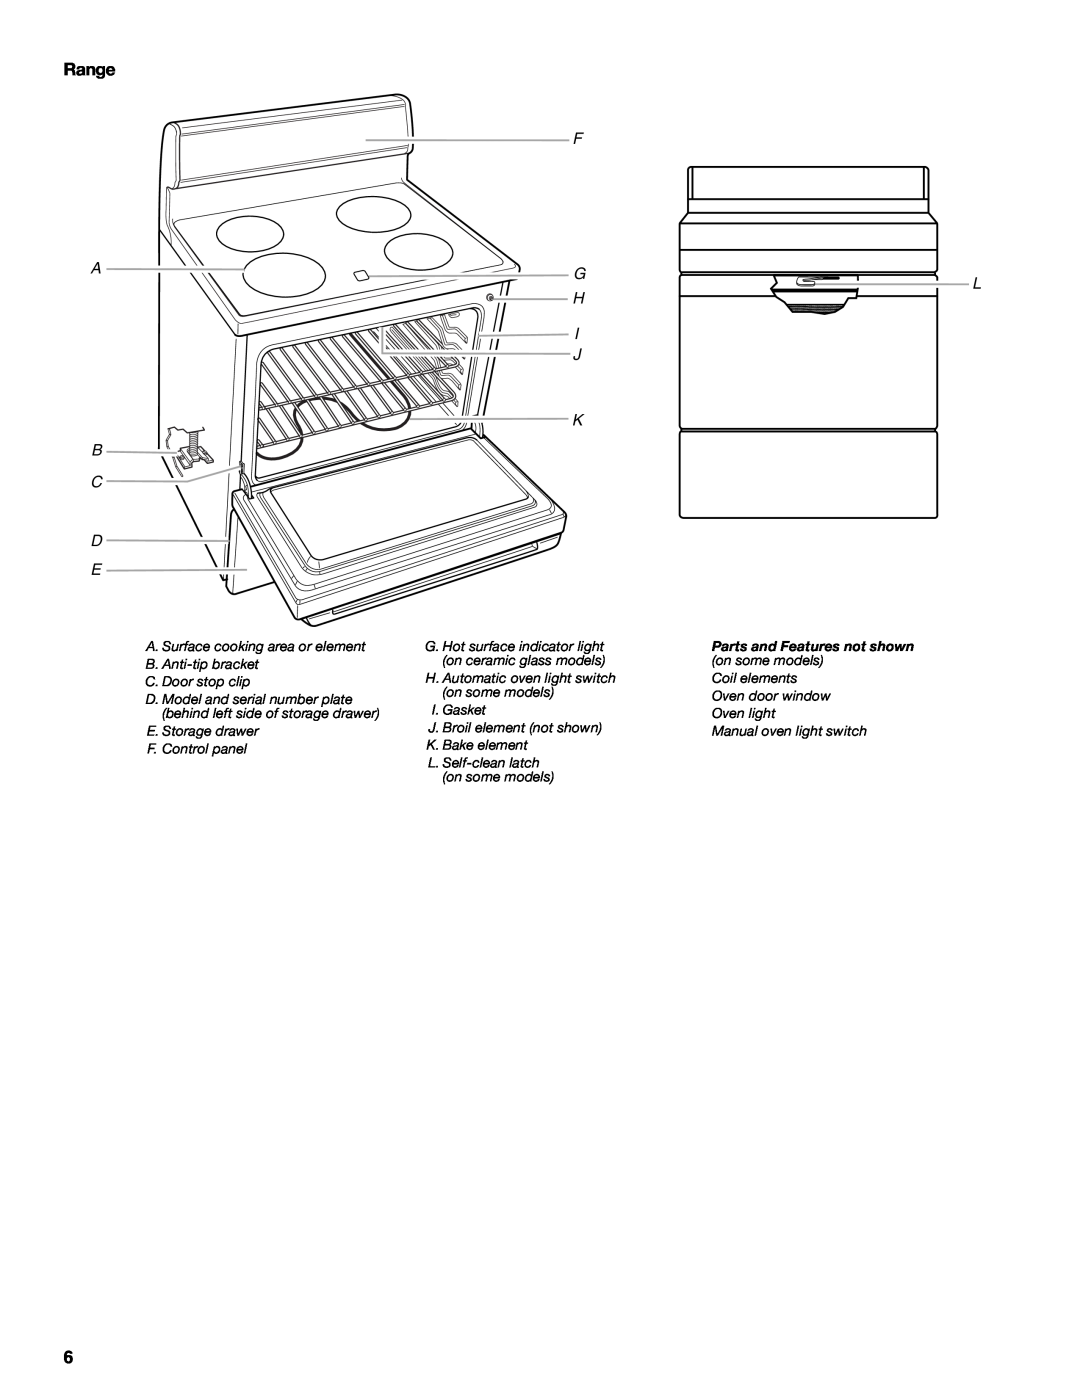 Whirlpool TES325MQ2 manual Range, F Ag H I J K B C D E, Parts and Features not shown on some models 